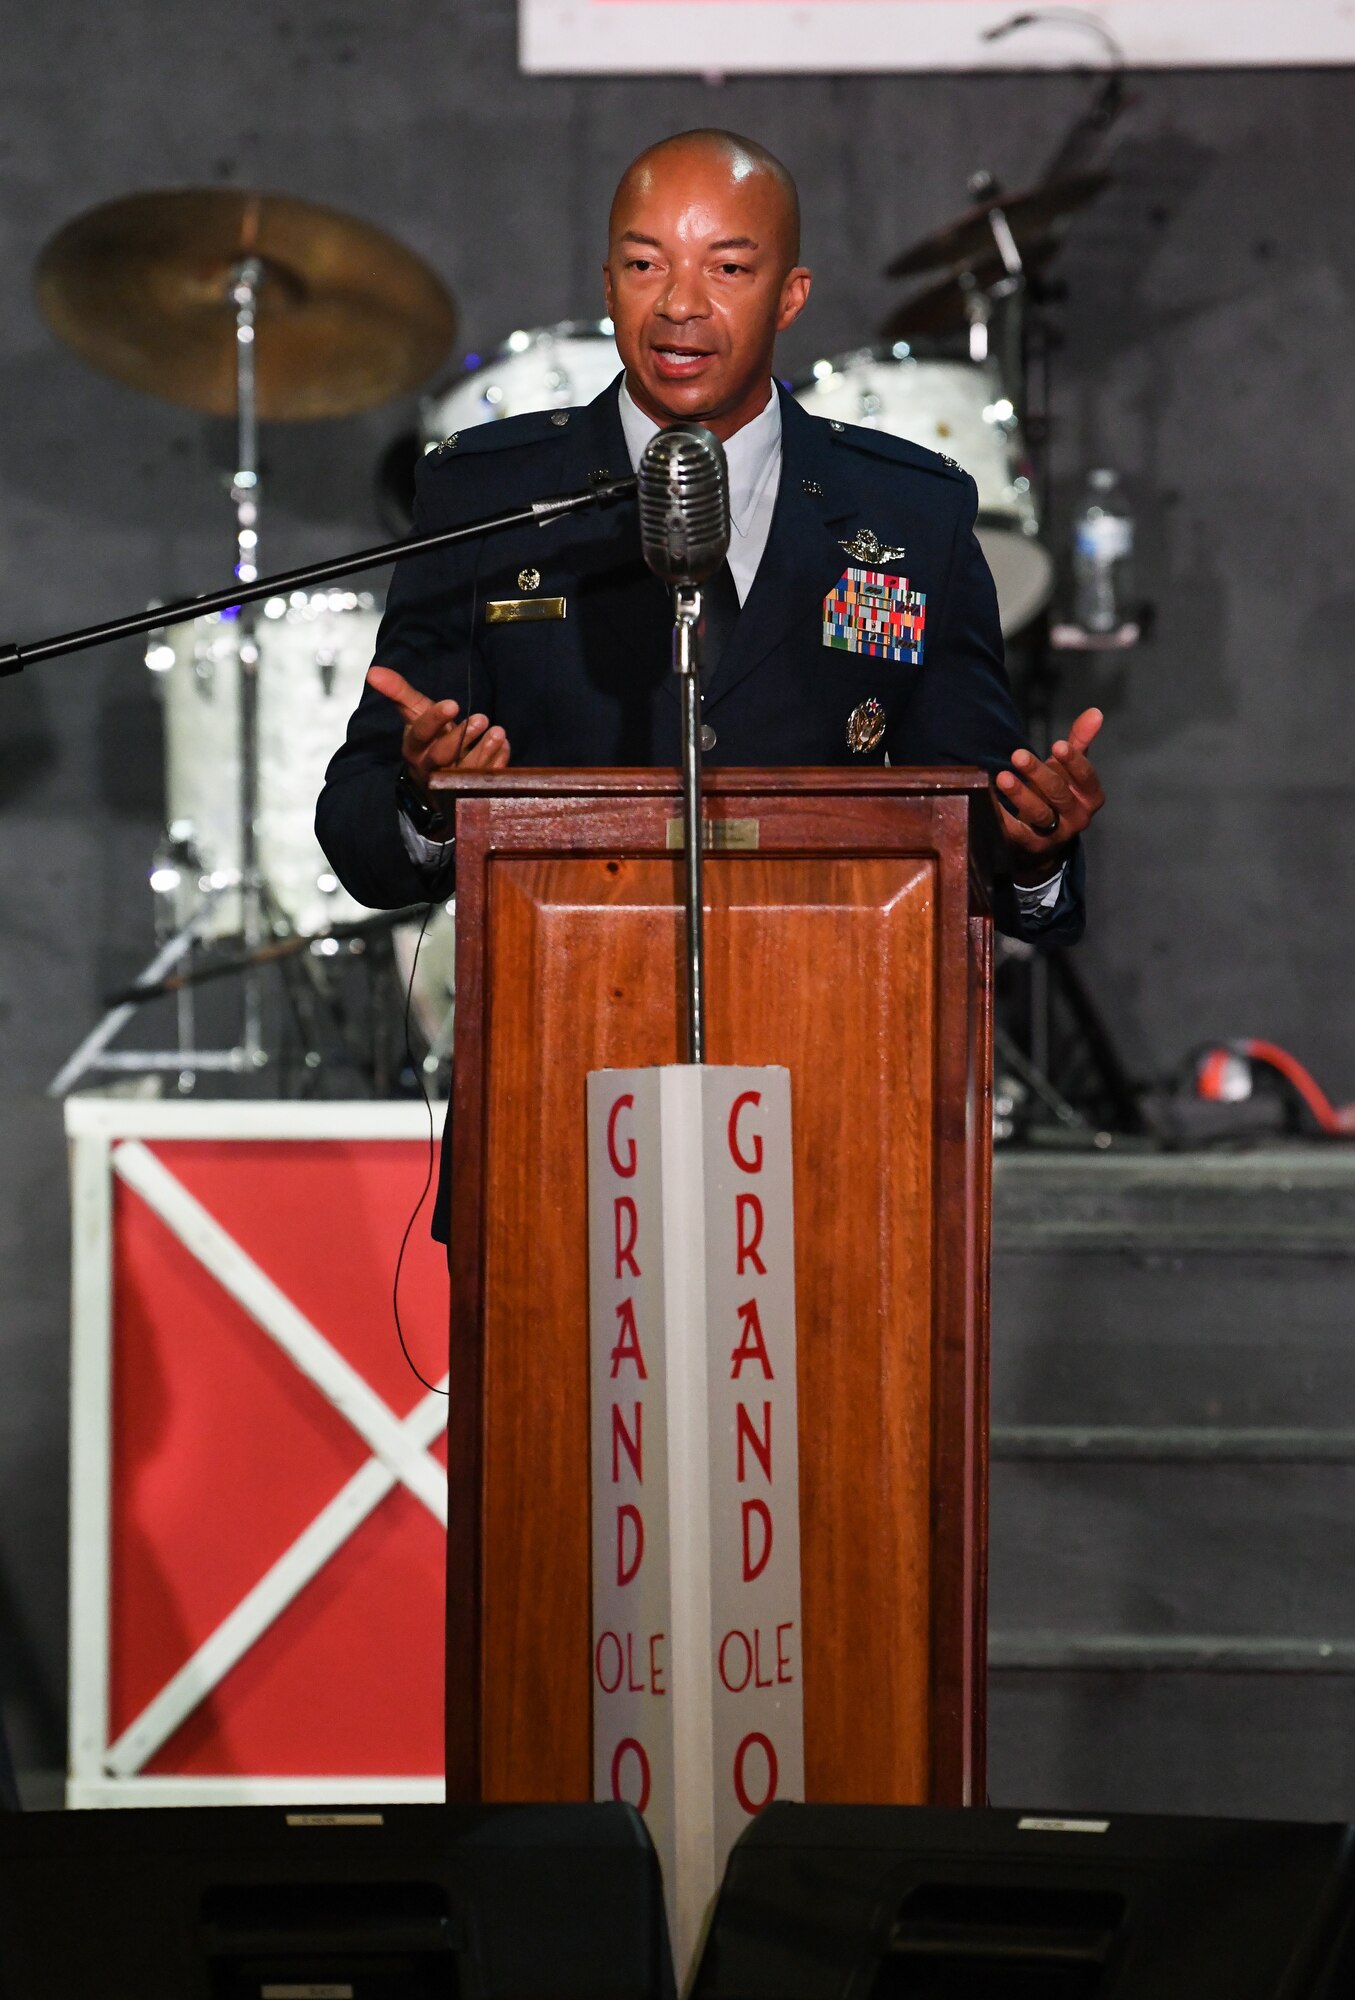 Col. Gordon speaking from lectern